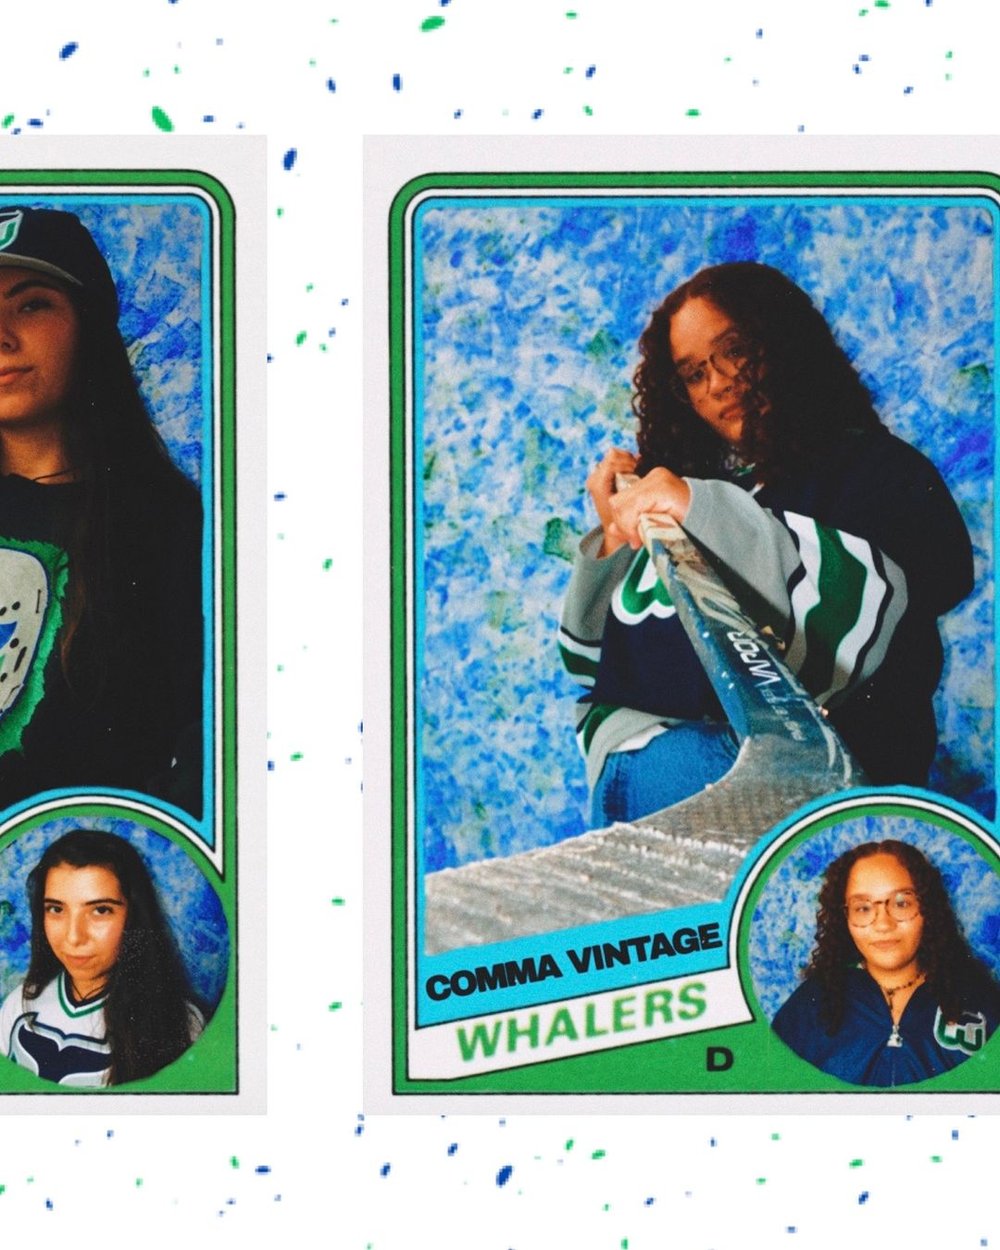 Comma Vintage is Reliving the poetry of Whalers Era — Cafeteria Media